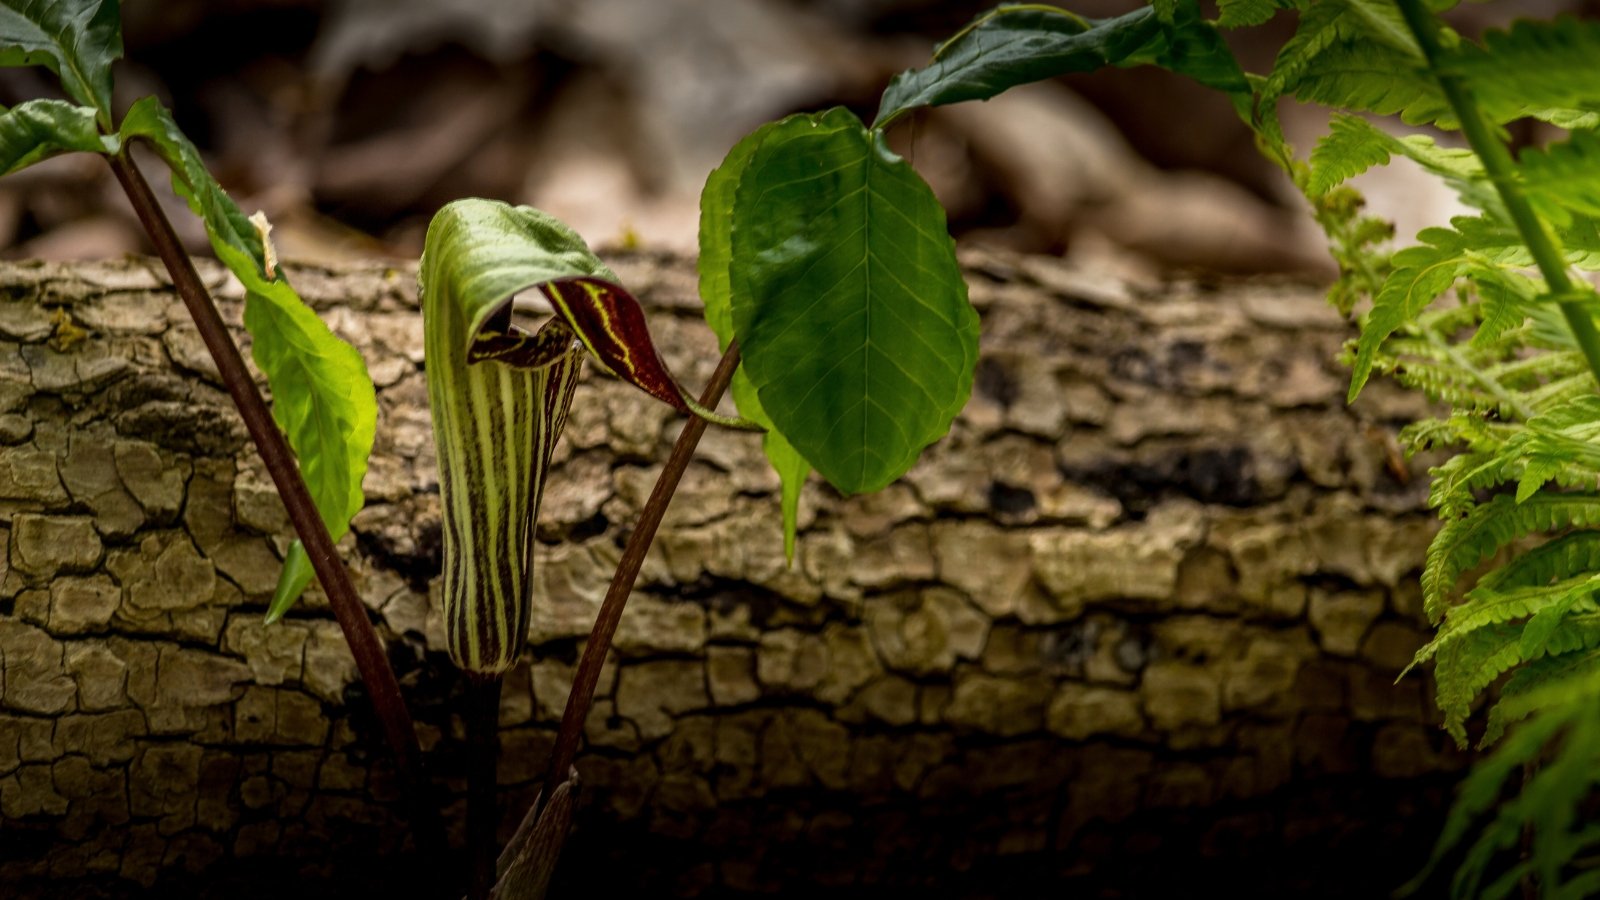 The flower of the jack-in-the-pulpit is a green and purple-striped spathe covering a spadix, nestled within a cluster of broad, divided leaves.